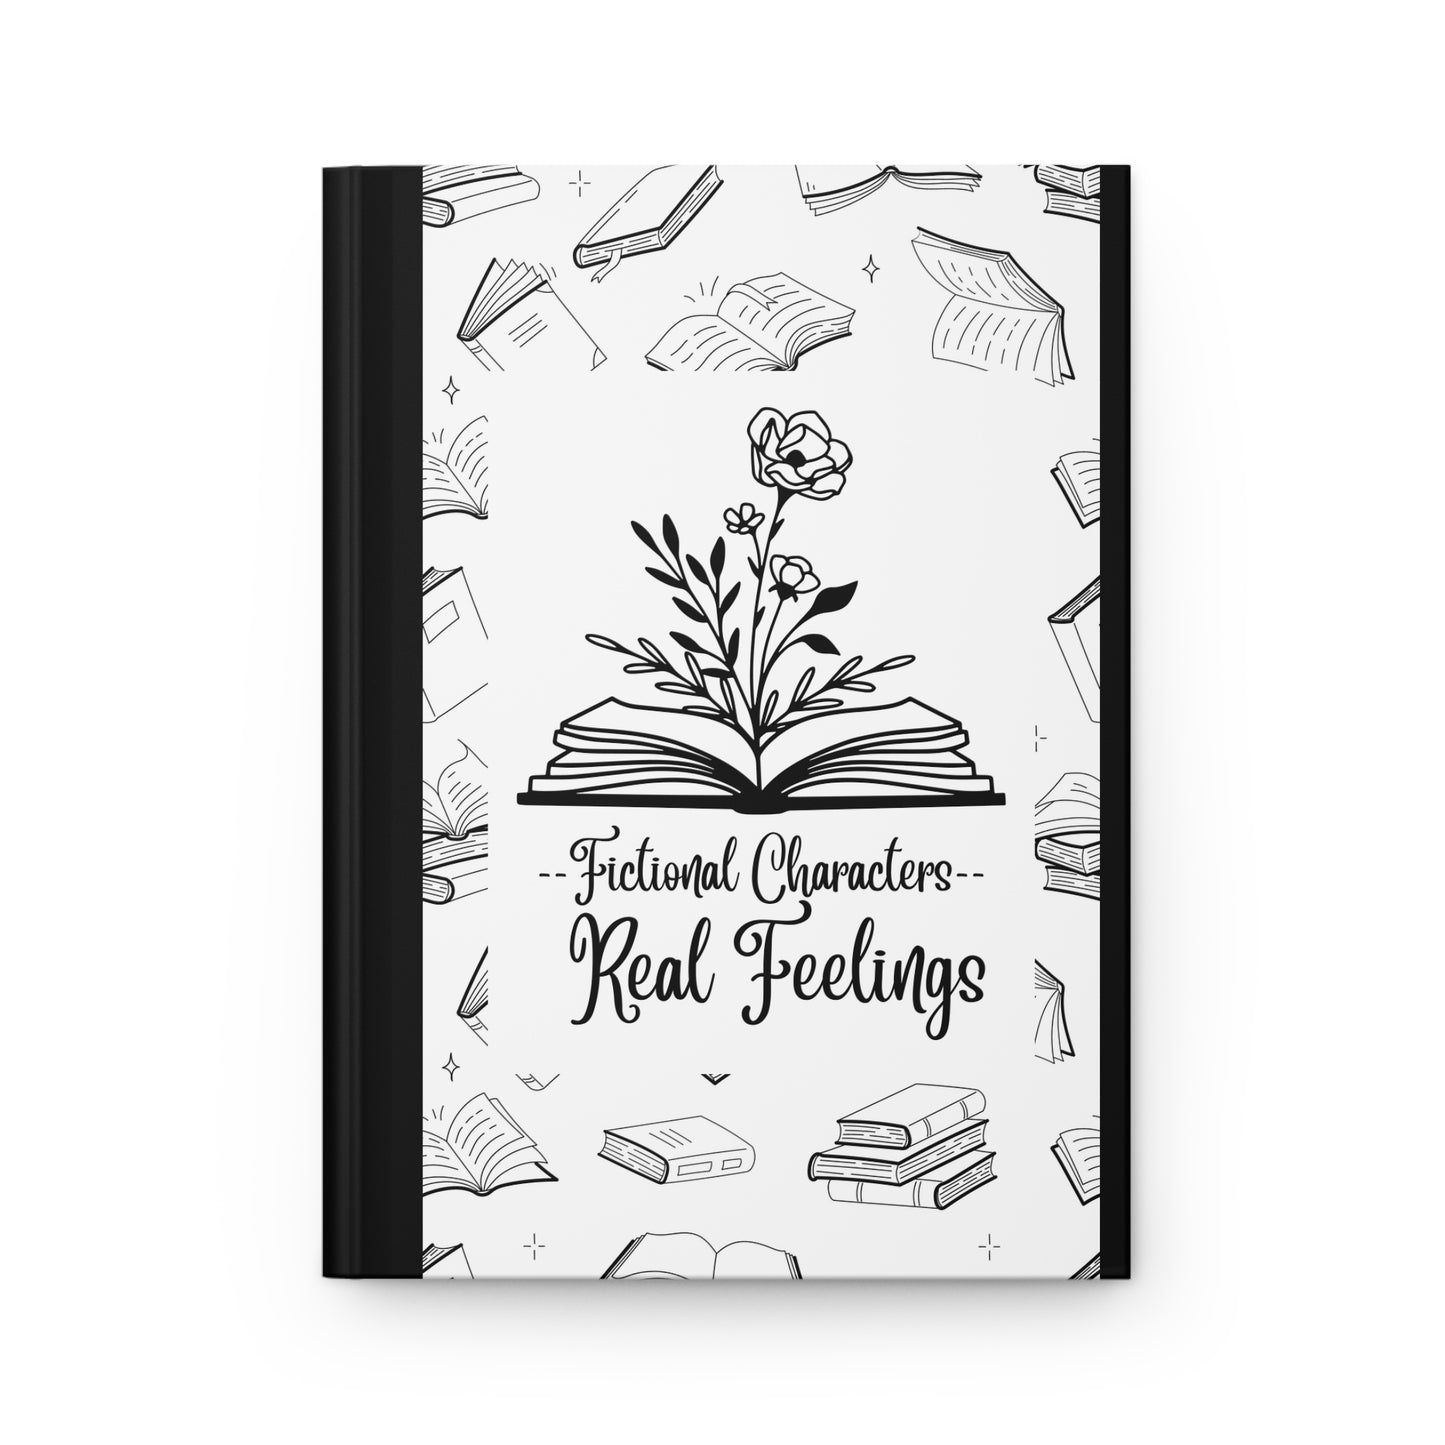 Fictional Characters Real Feelings Hardcover Journal